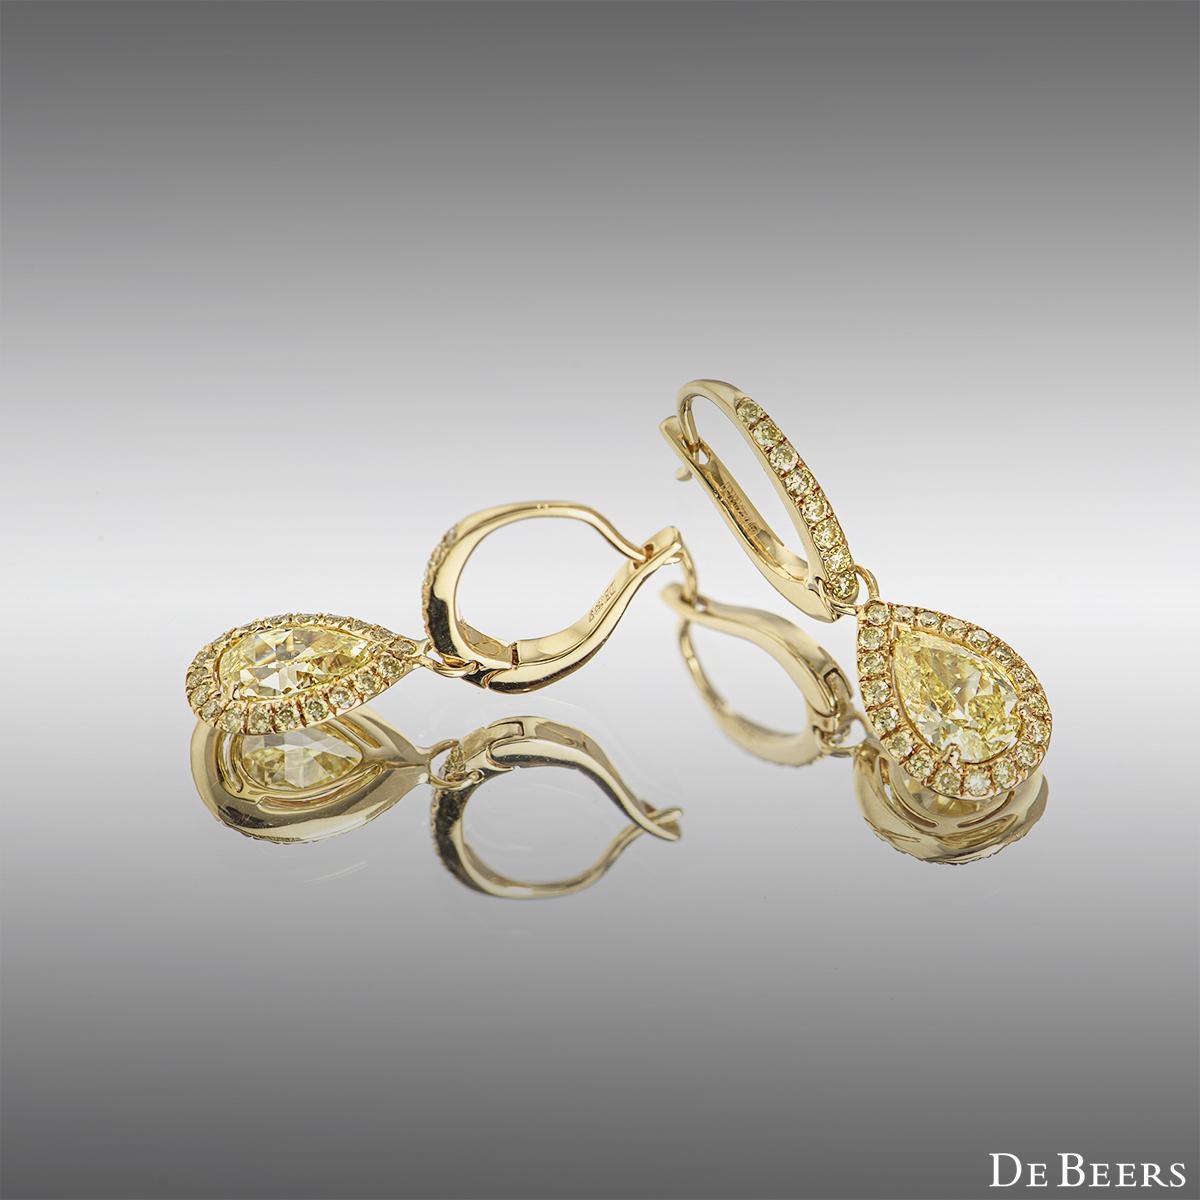 An elegant pair of 18k yellow gold diamond earrings by De Beers from the Aura collection. The drop earrings each comprise of a half hoop with 8 round brilliant cut yellow diamonds suspending a pear shaped fancy yellow diamond and further